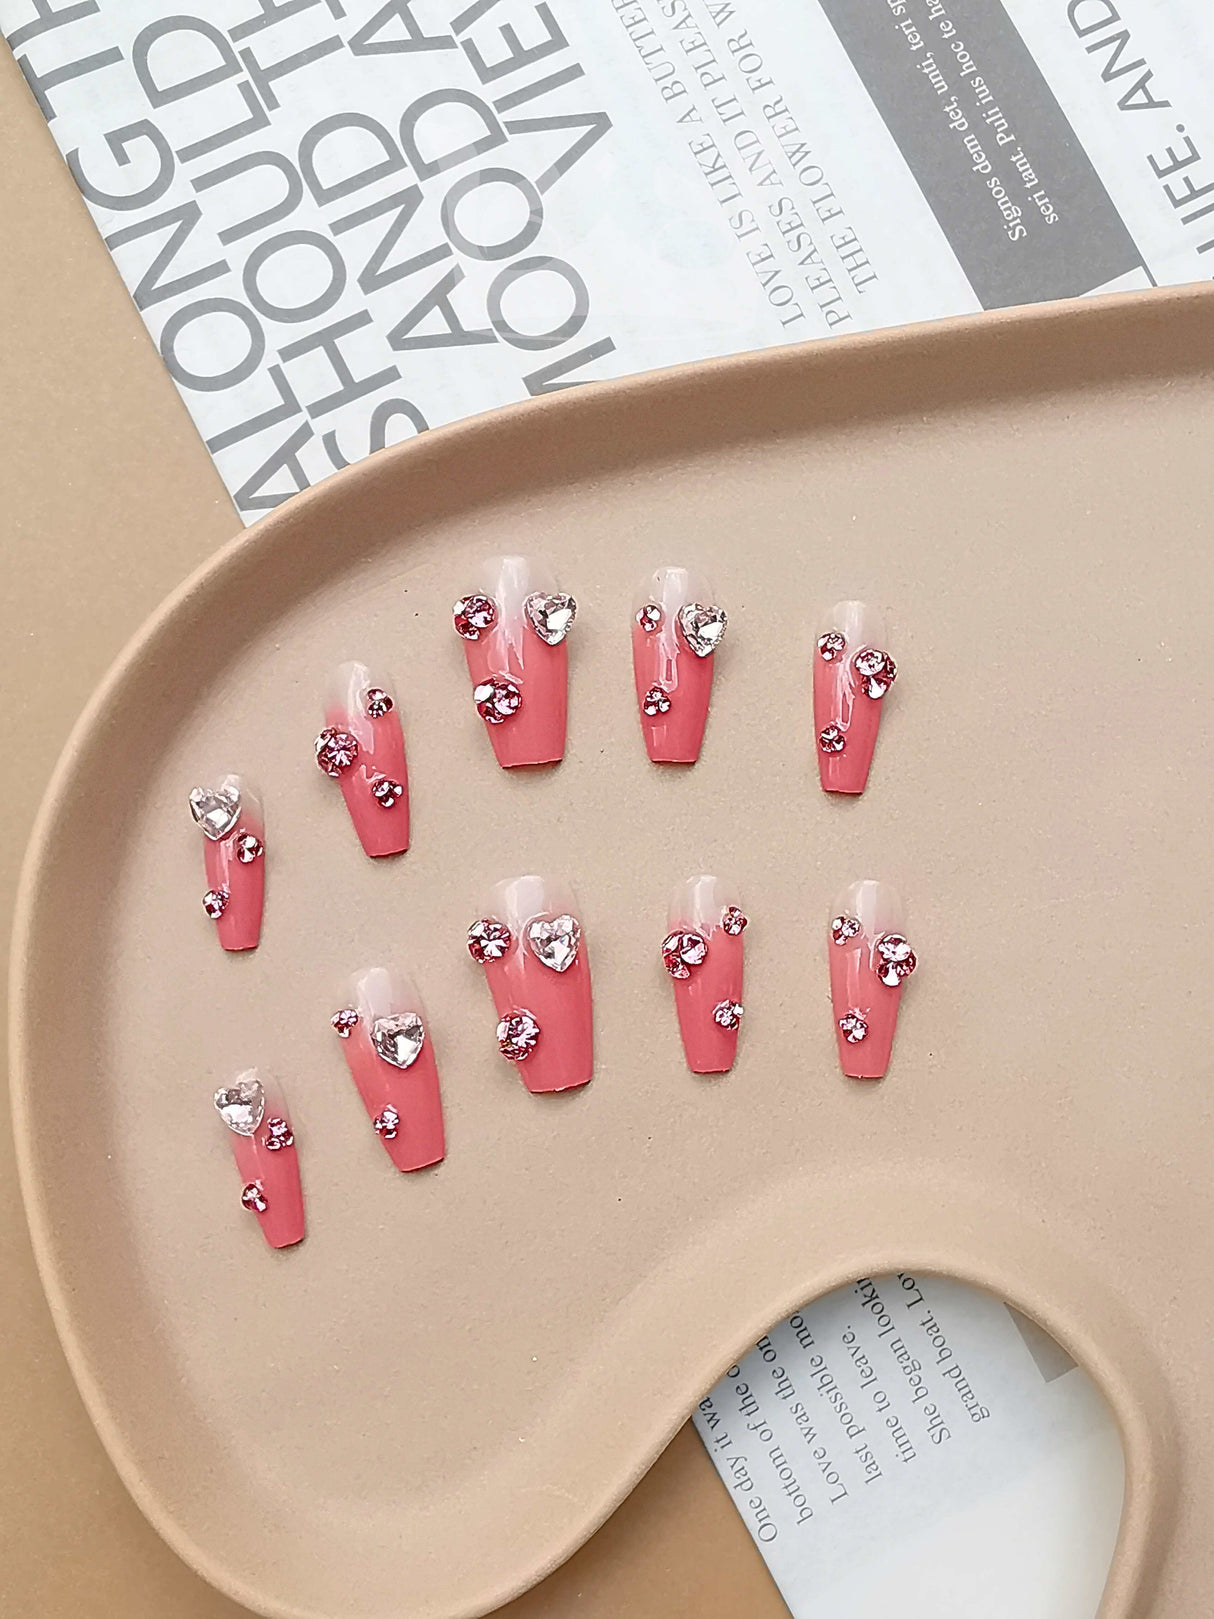 These press-on nails are for a special occasion, with large rhinestone embellishments adding a glamorous effect. Short to medium length and rounded shape for practicality.